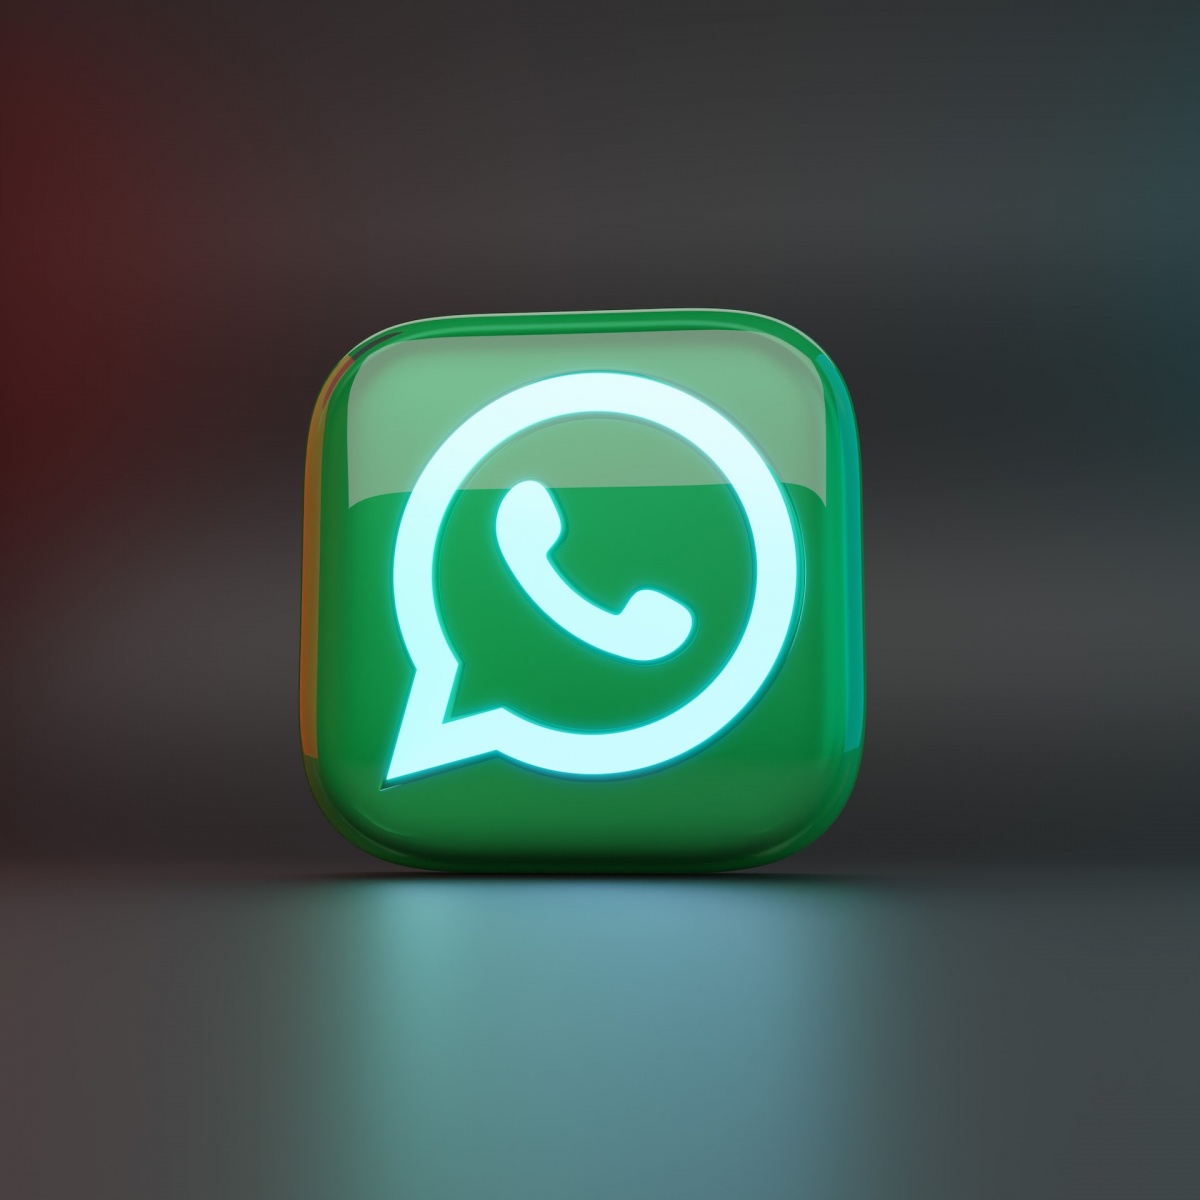 WhatsApp Will Soon Stop Working on 49 Smartphones Including iPhone 5 Starting December 31